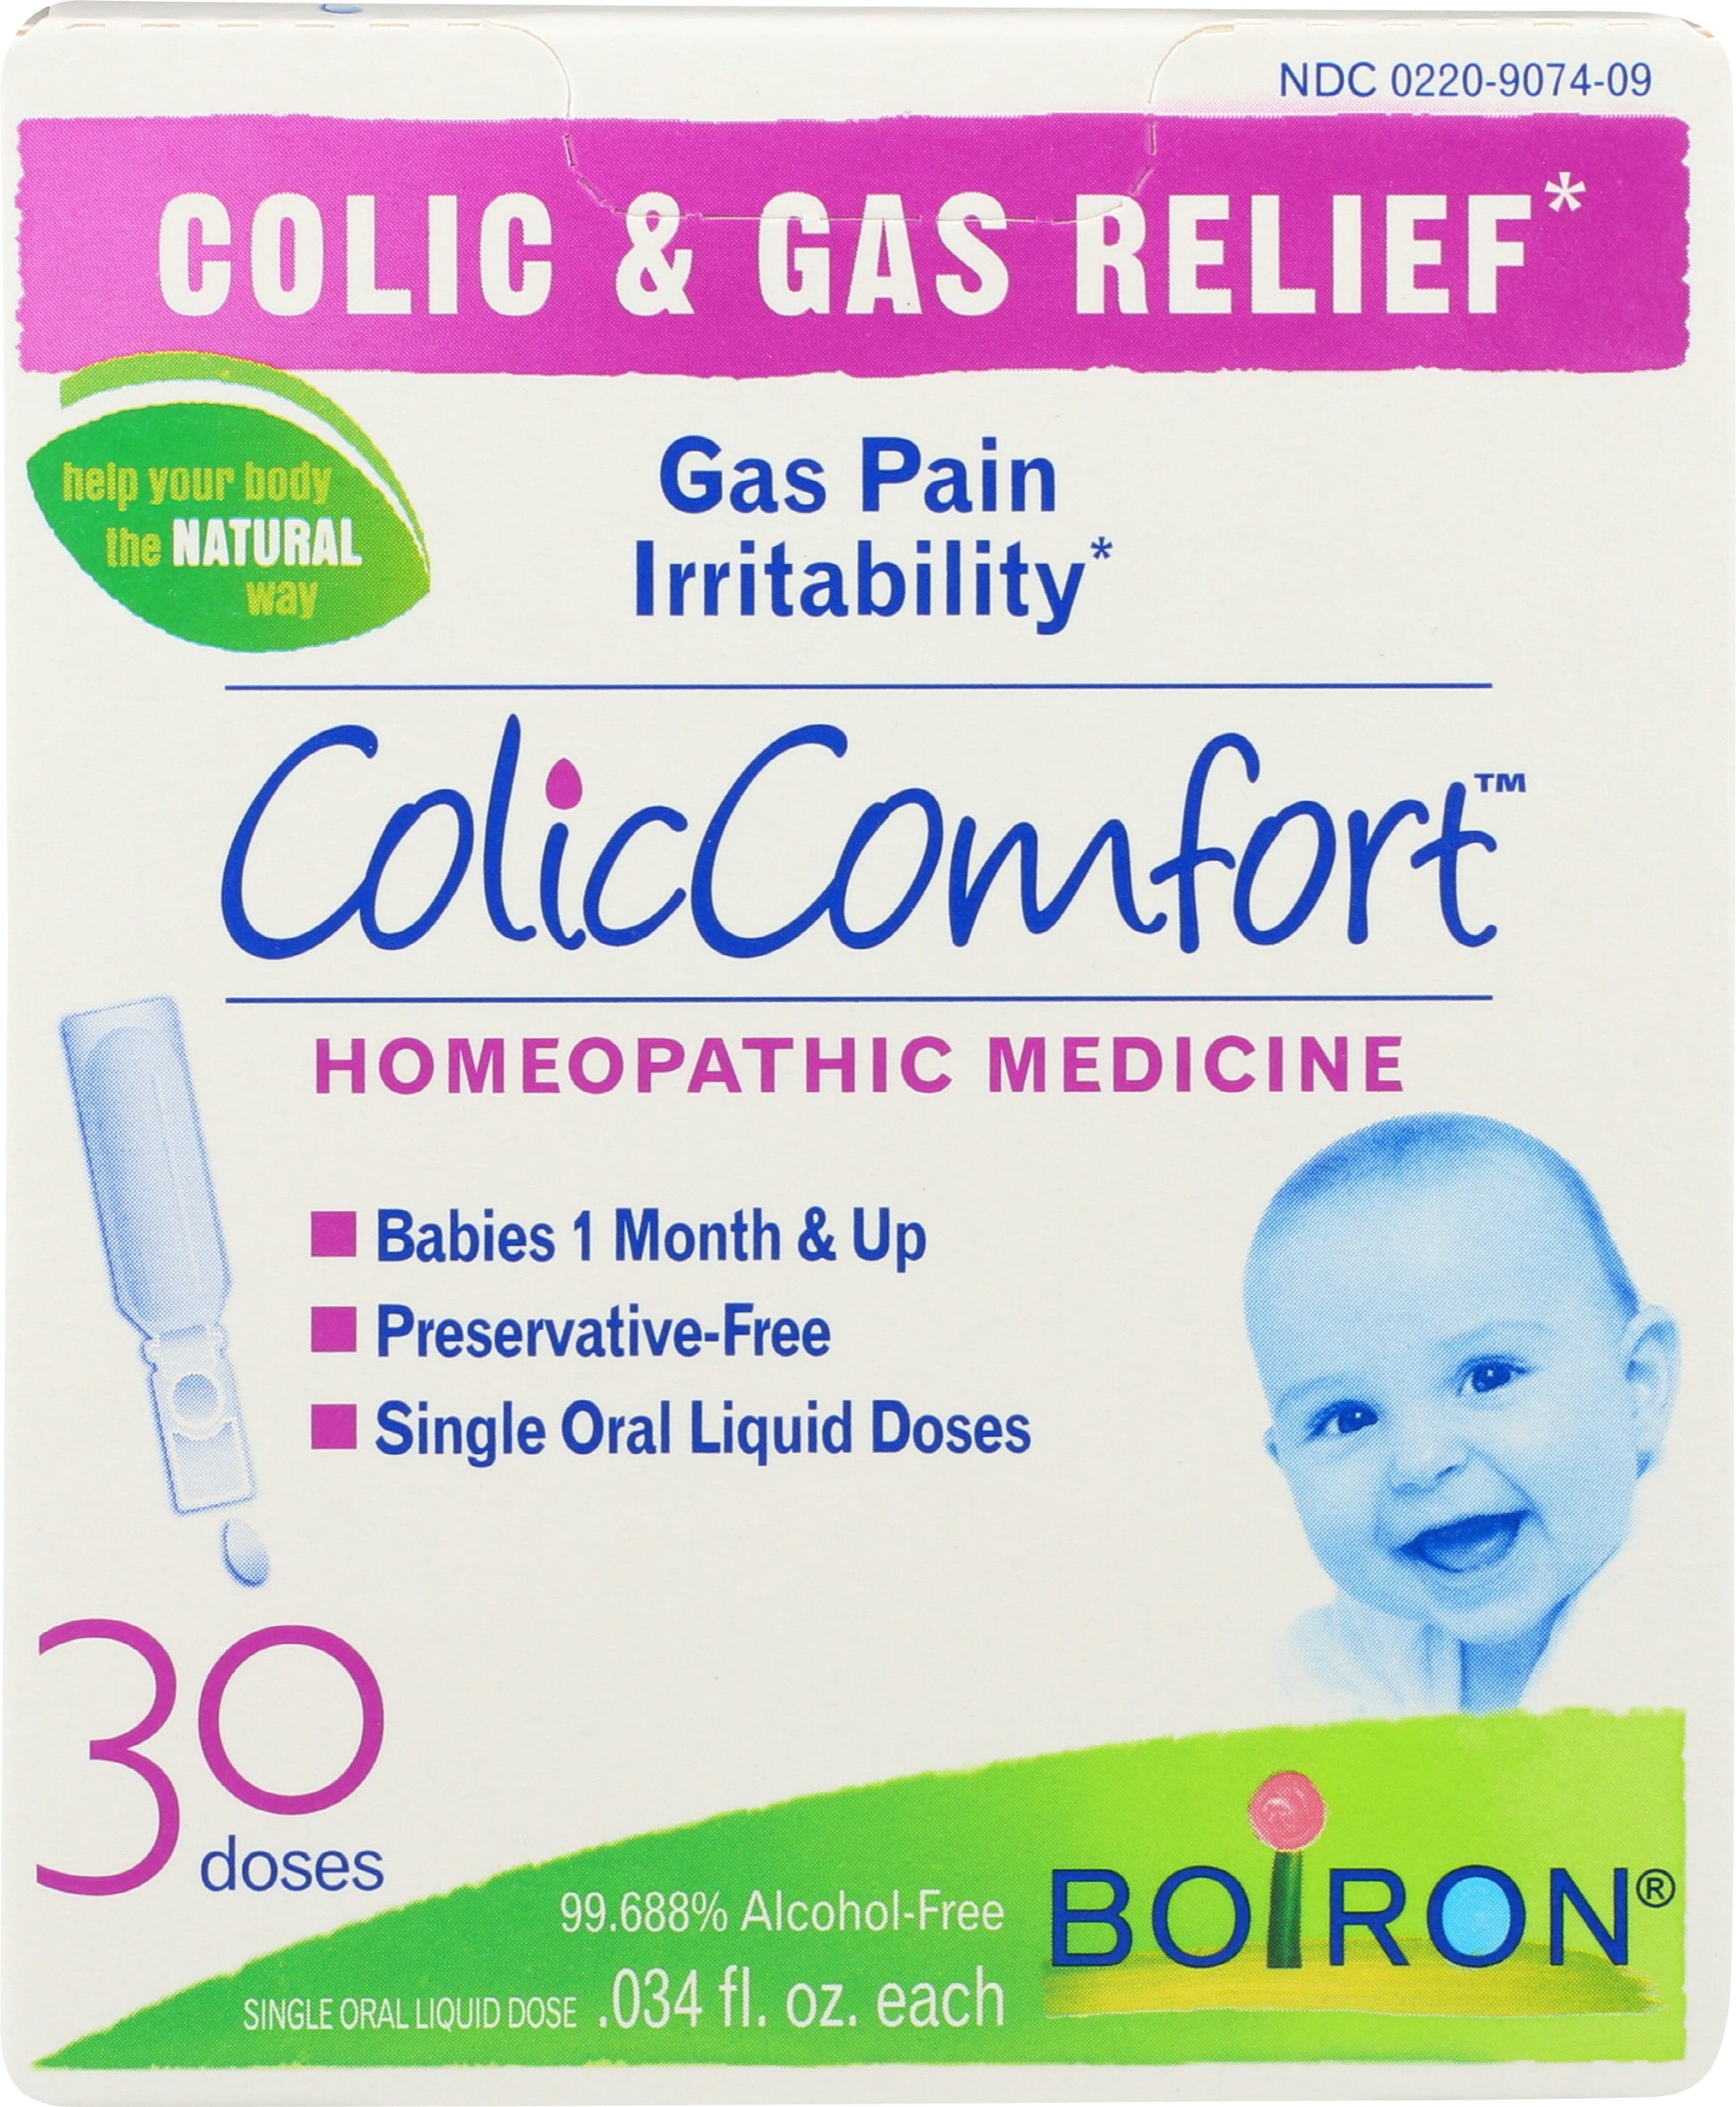 Boiron ColicComfort Gas & Colic Relief 30 Liquid Doses Front